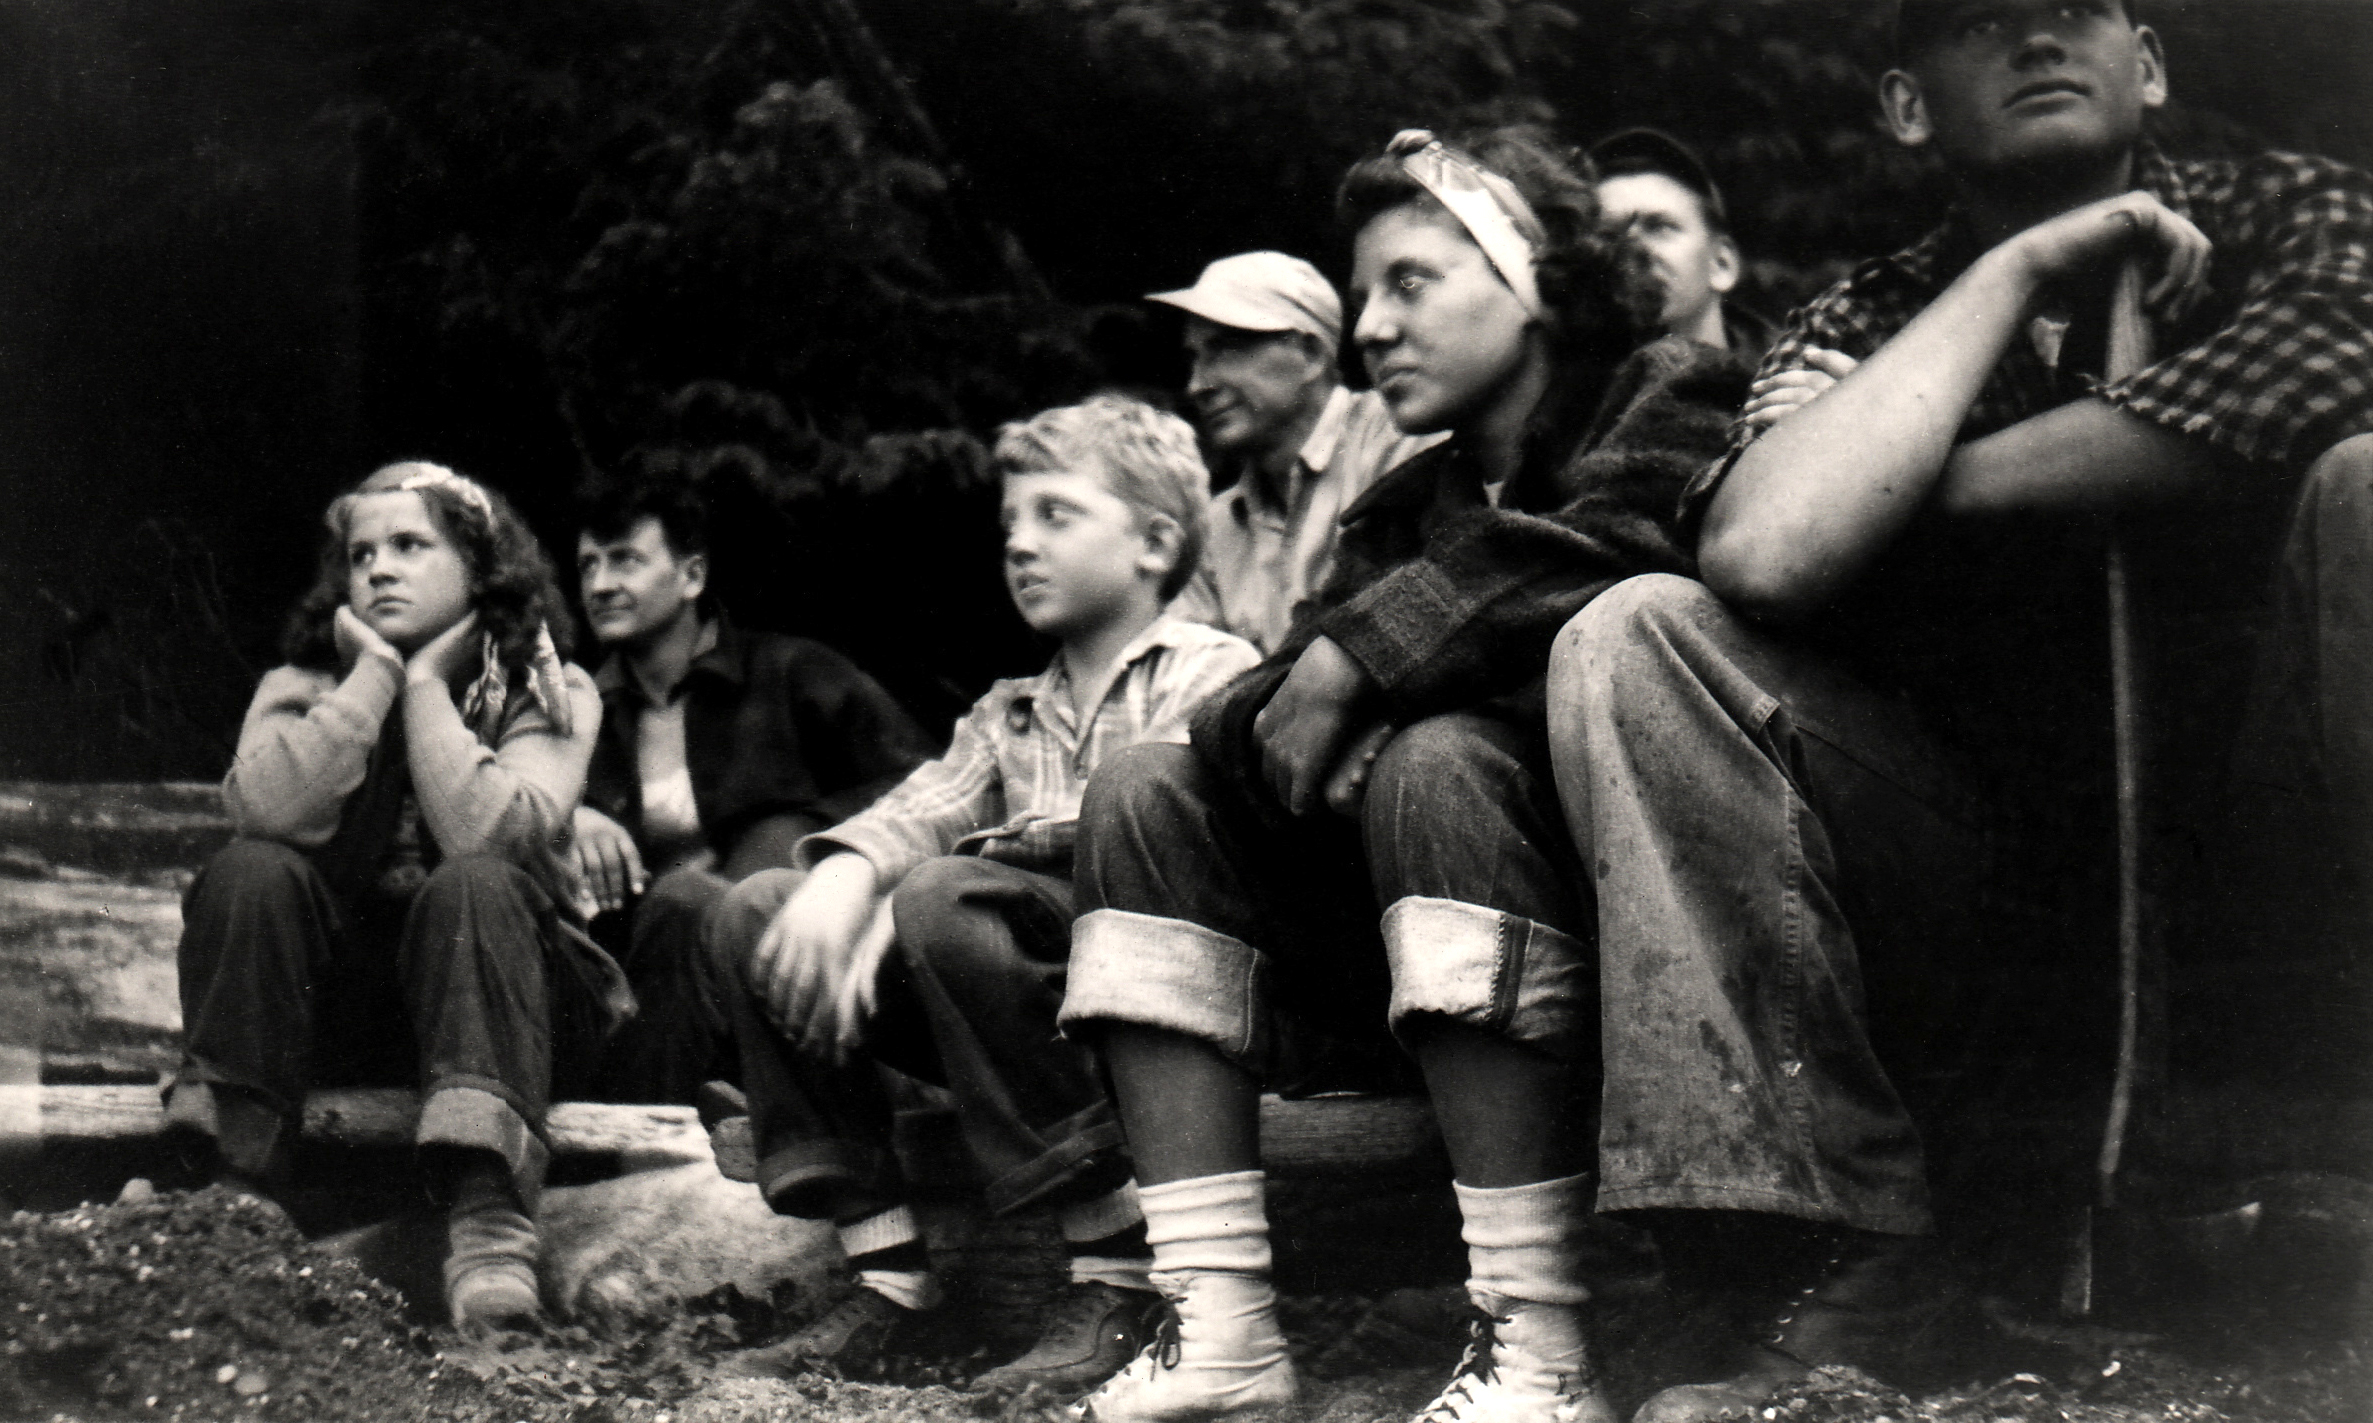 Johnson family on a fishing trip in Oregon sometime in the mid 1940's. 